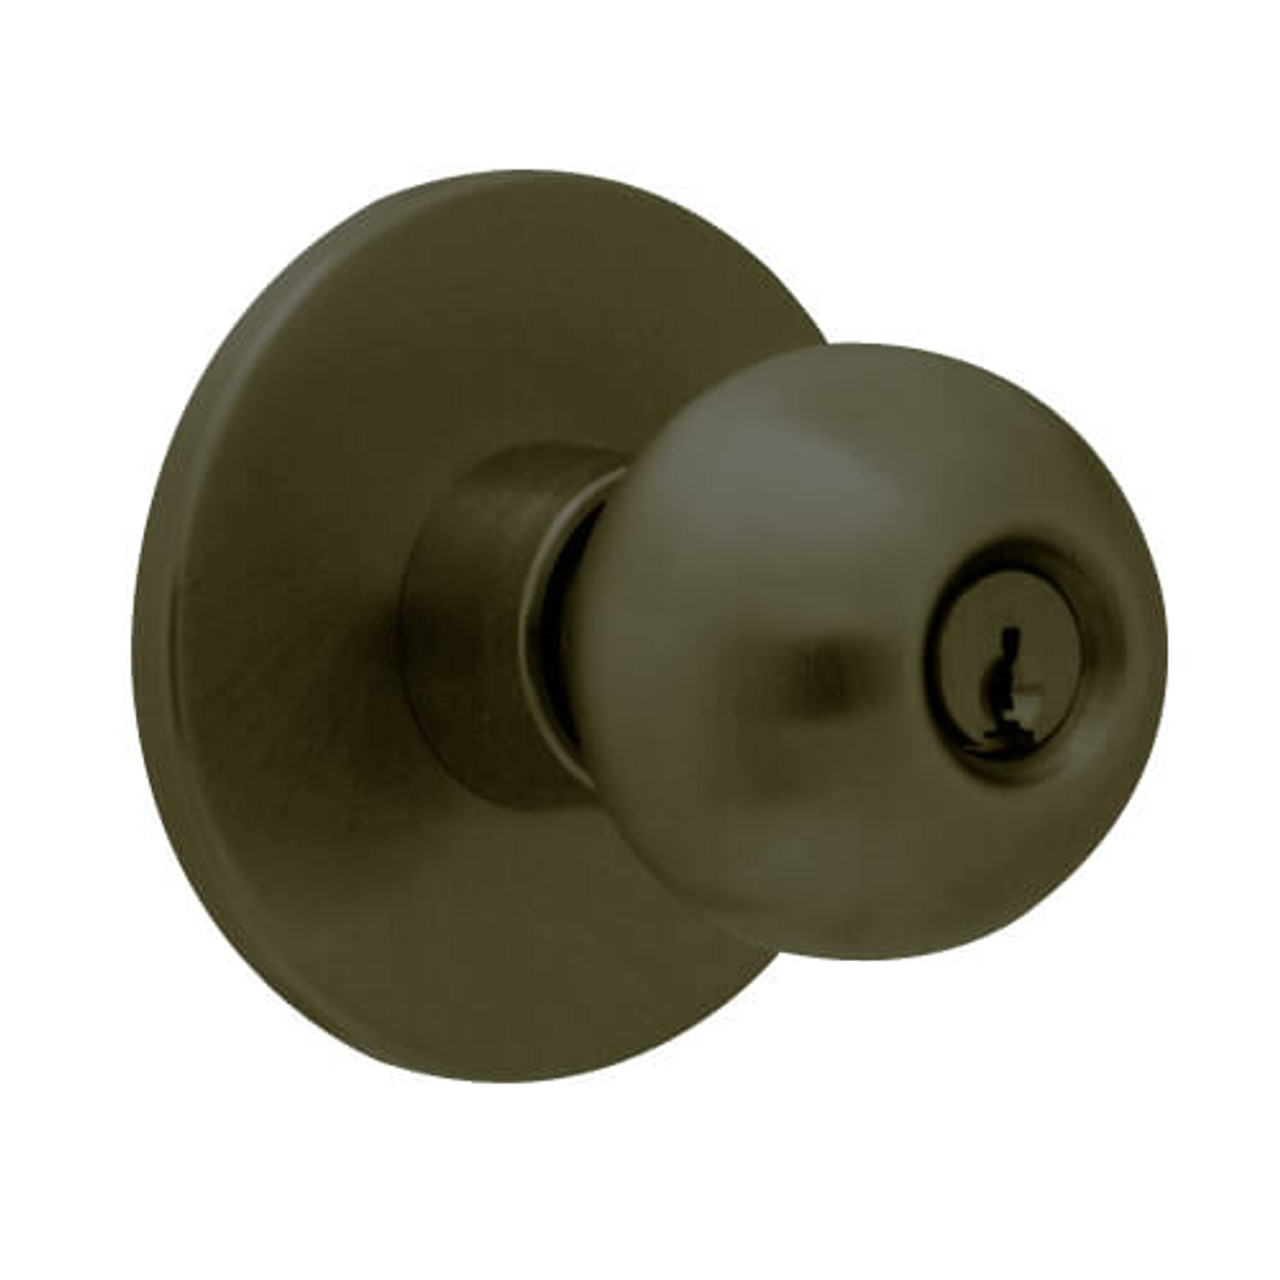 X501PD-HY-613 Falcon X Series Cylindrical Entry Lock with Hana-York Knob Style in Oil Rubbed Bronze Finish